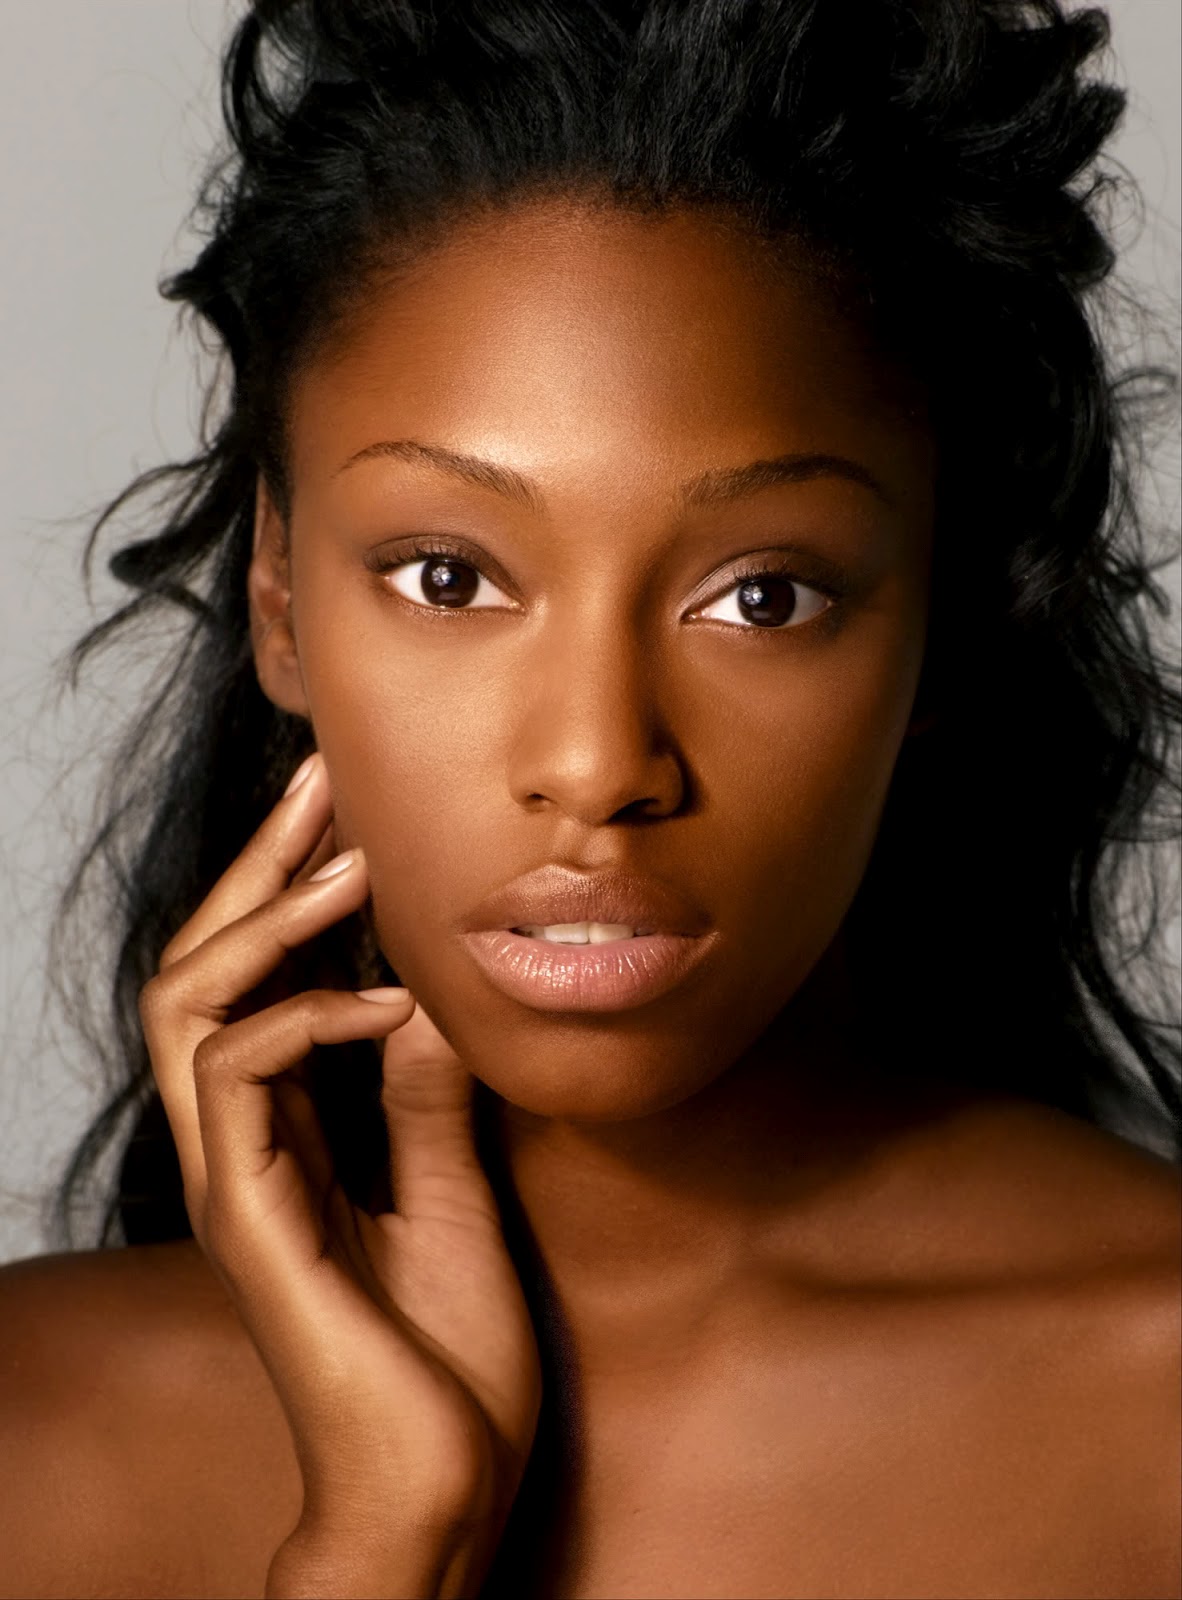 Famous African American Models | Famous Black Models (Page 6)